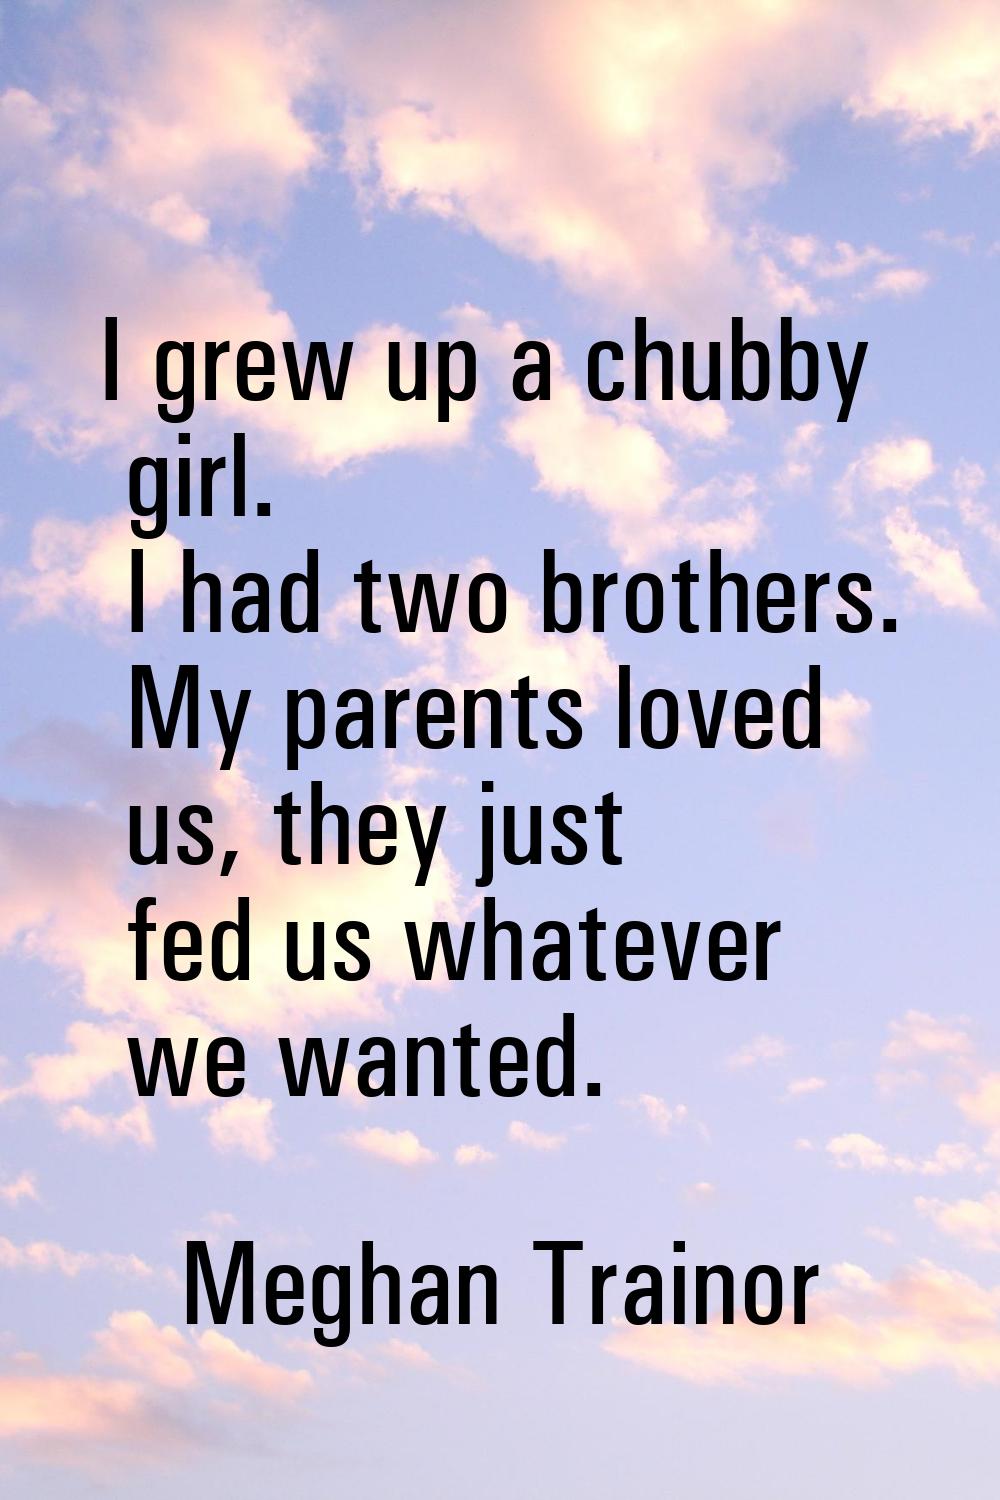 I grew up a chubby girl. I had two brothers. My parents loved us, they just fed us whatever we want